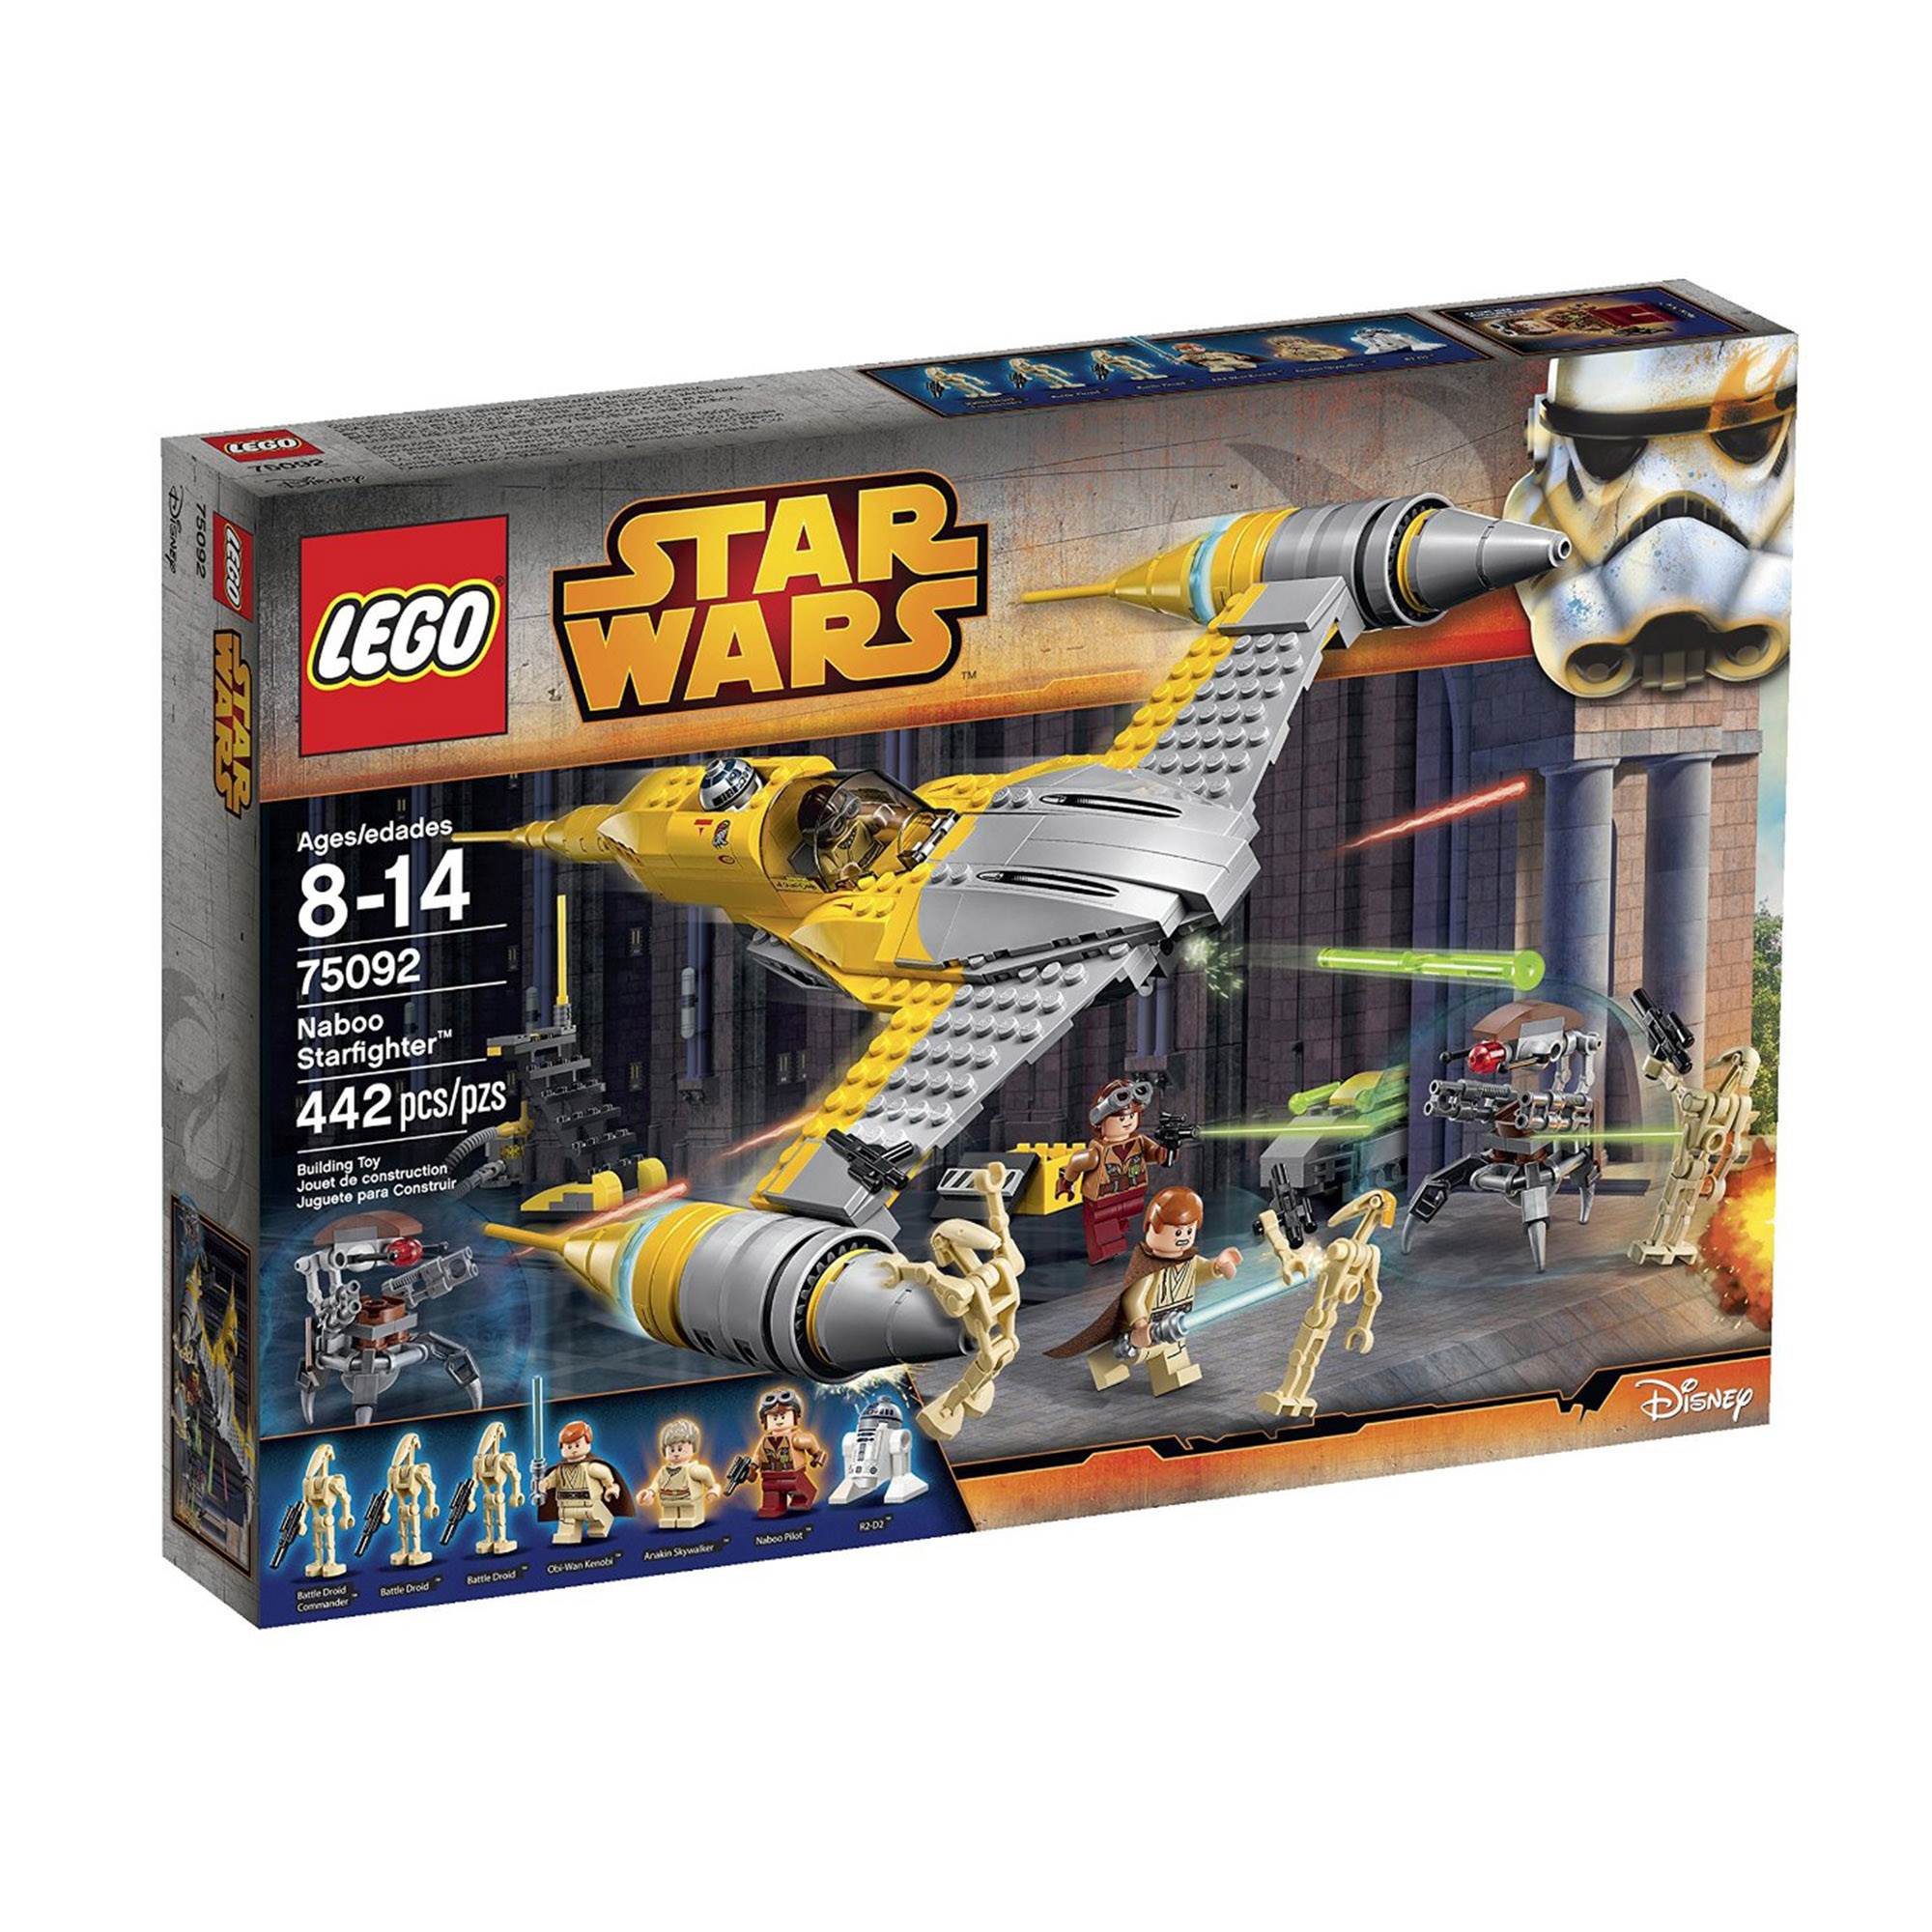 LEGO Star Wars Naboo Starfighter 75092 Building Kit - image 2 of 7